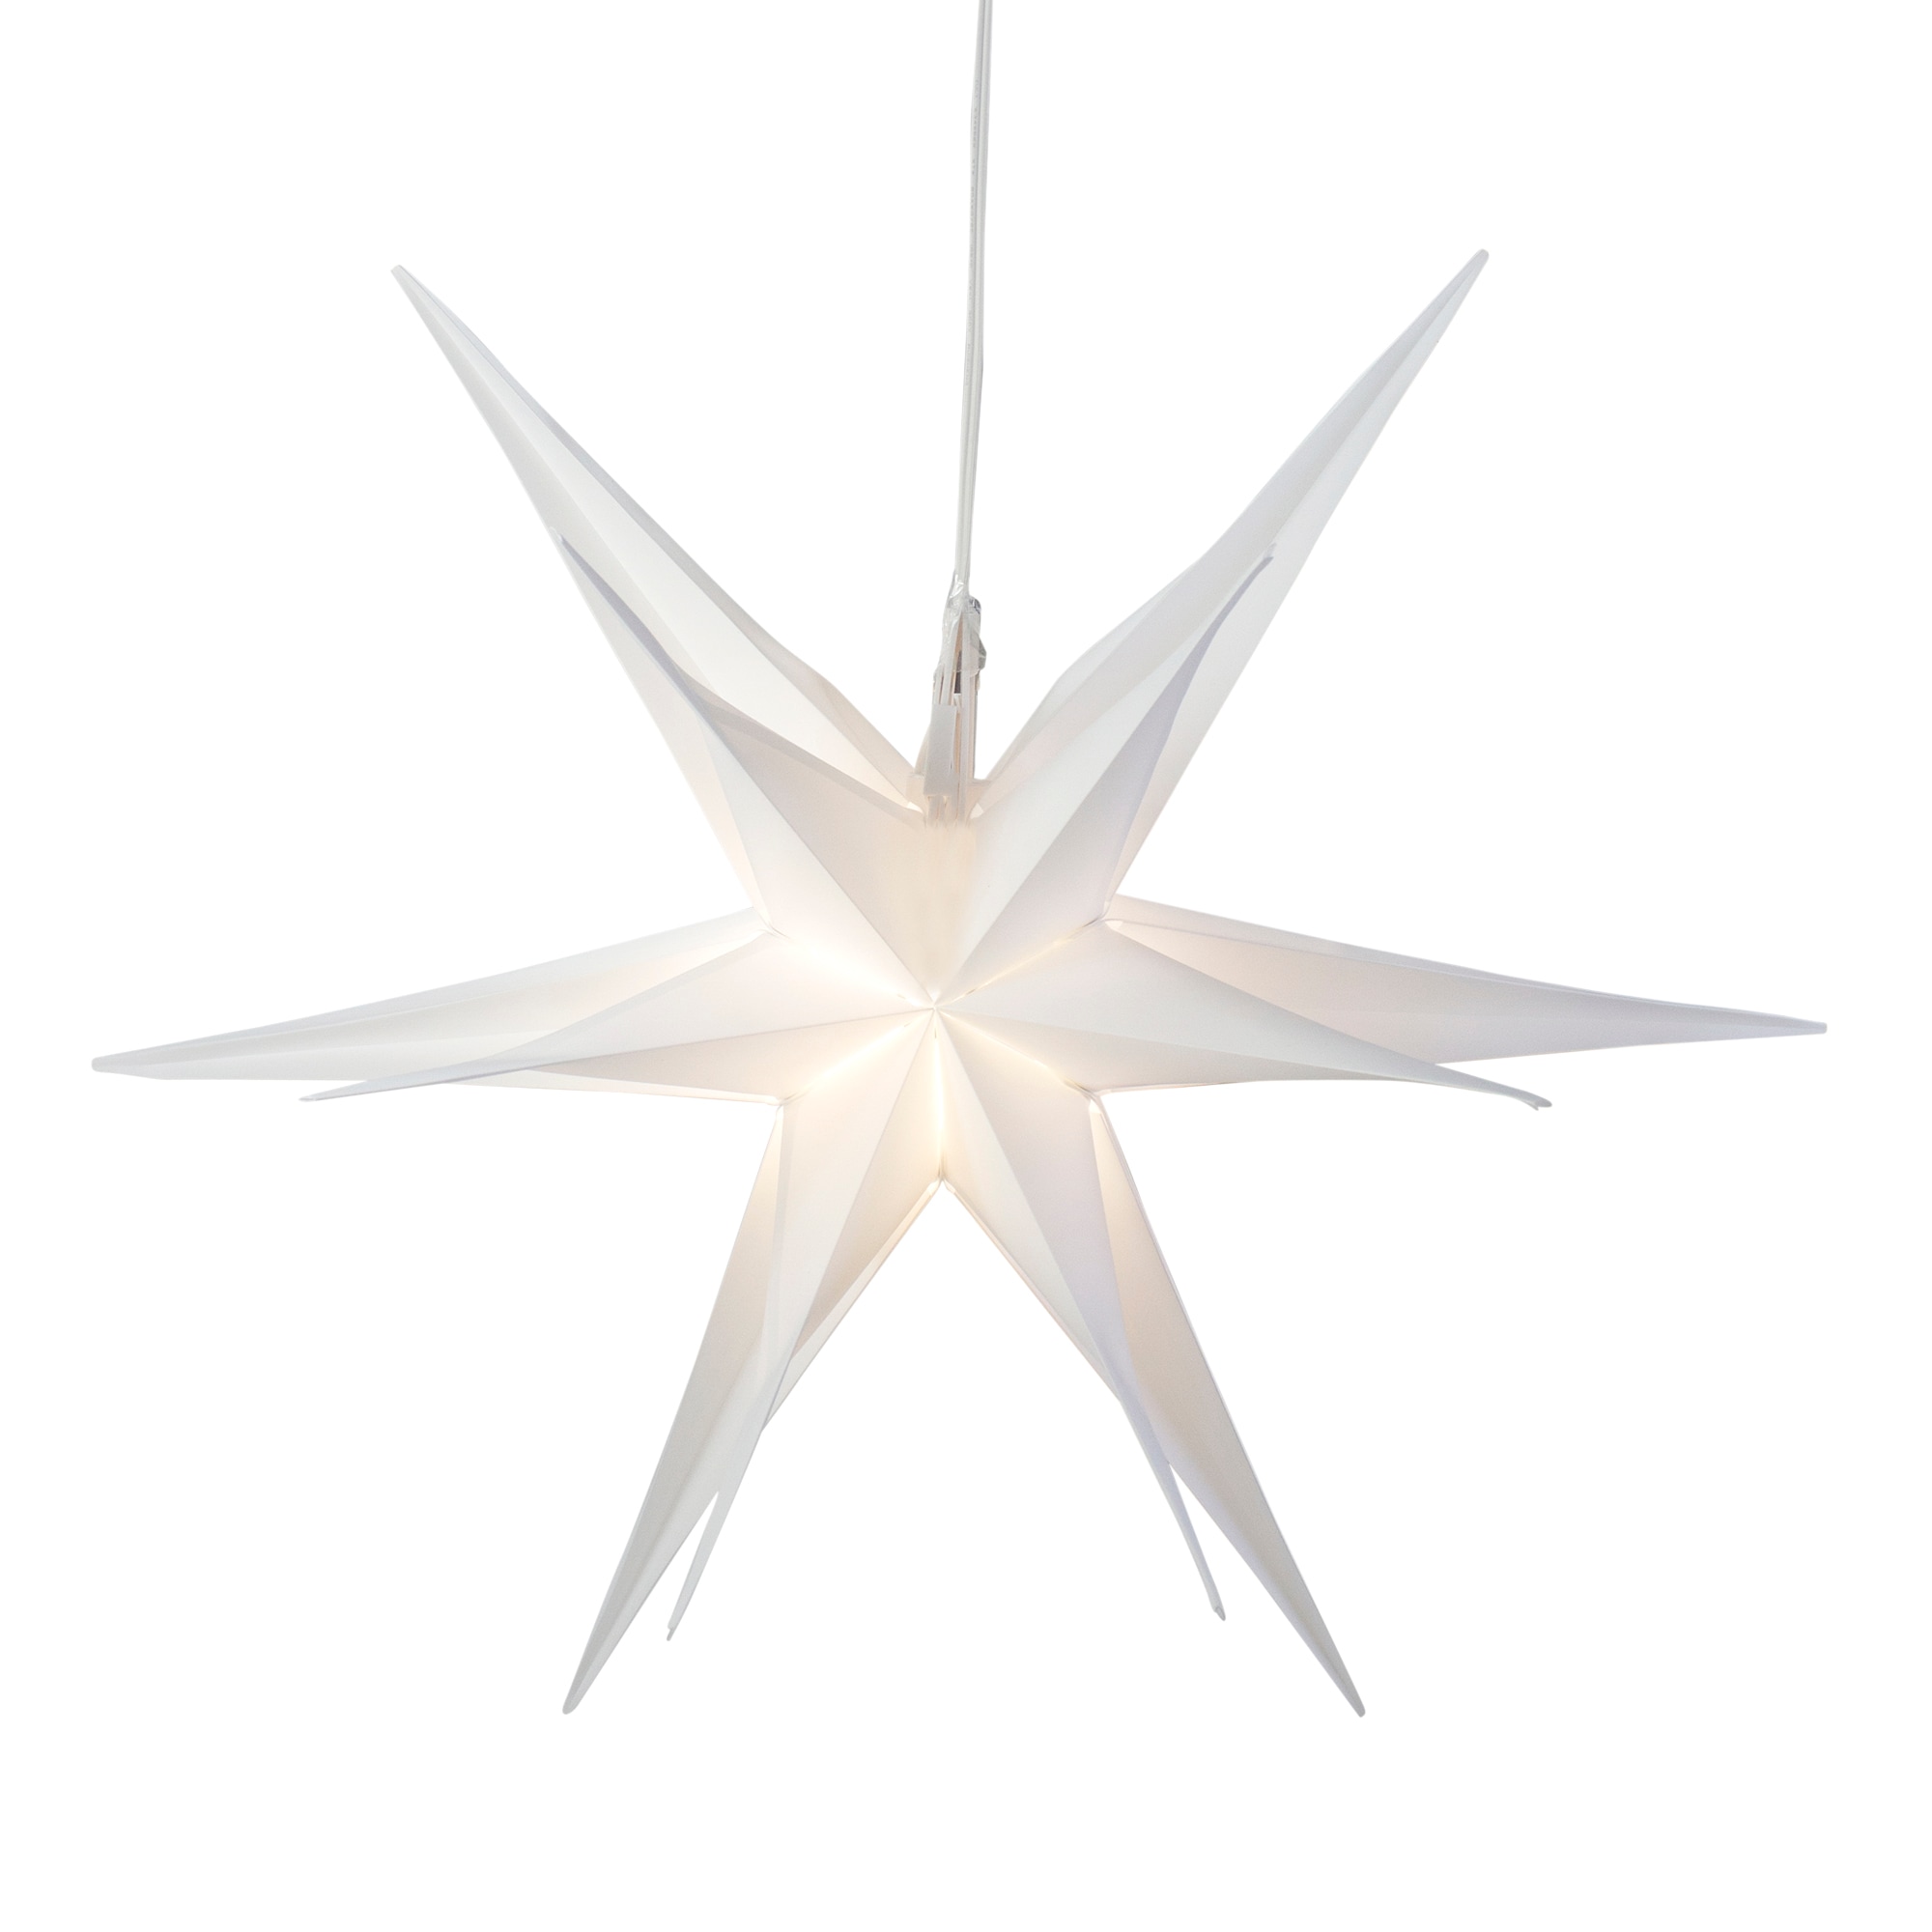 Kringle Traditions Frosted LED Moravian Star Light, 14, Clear